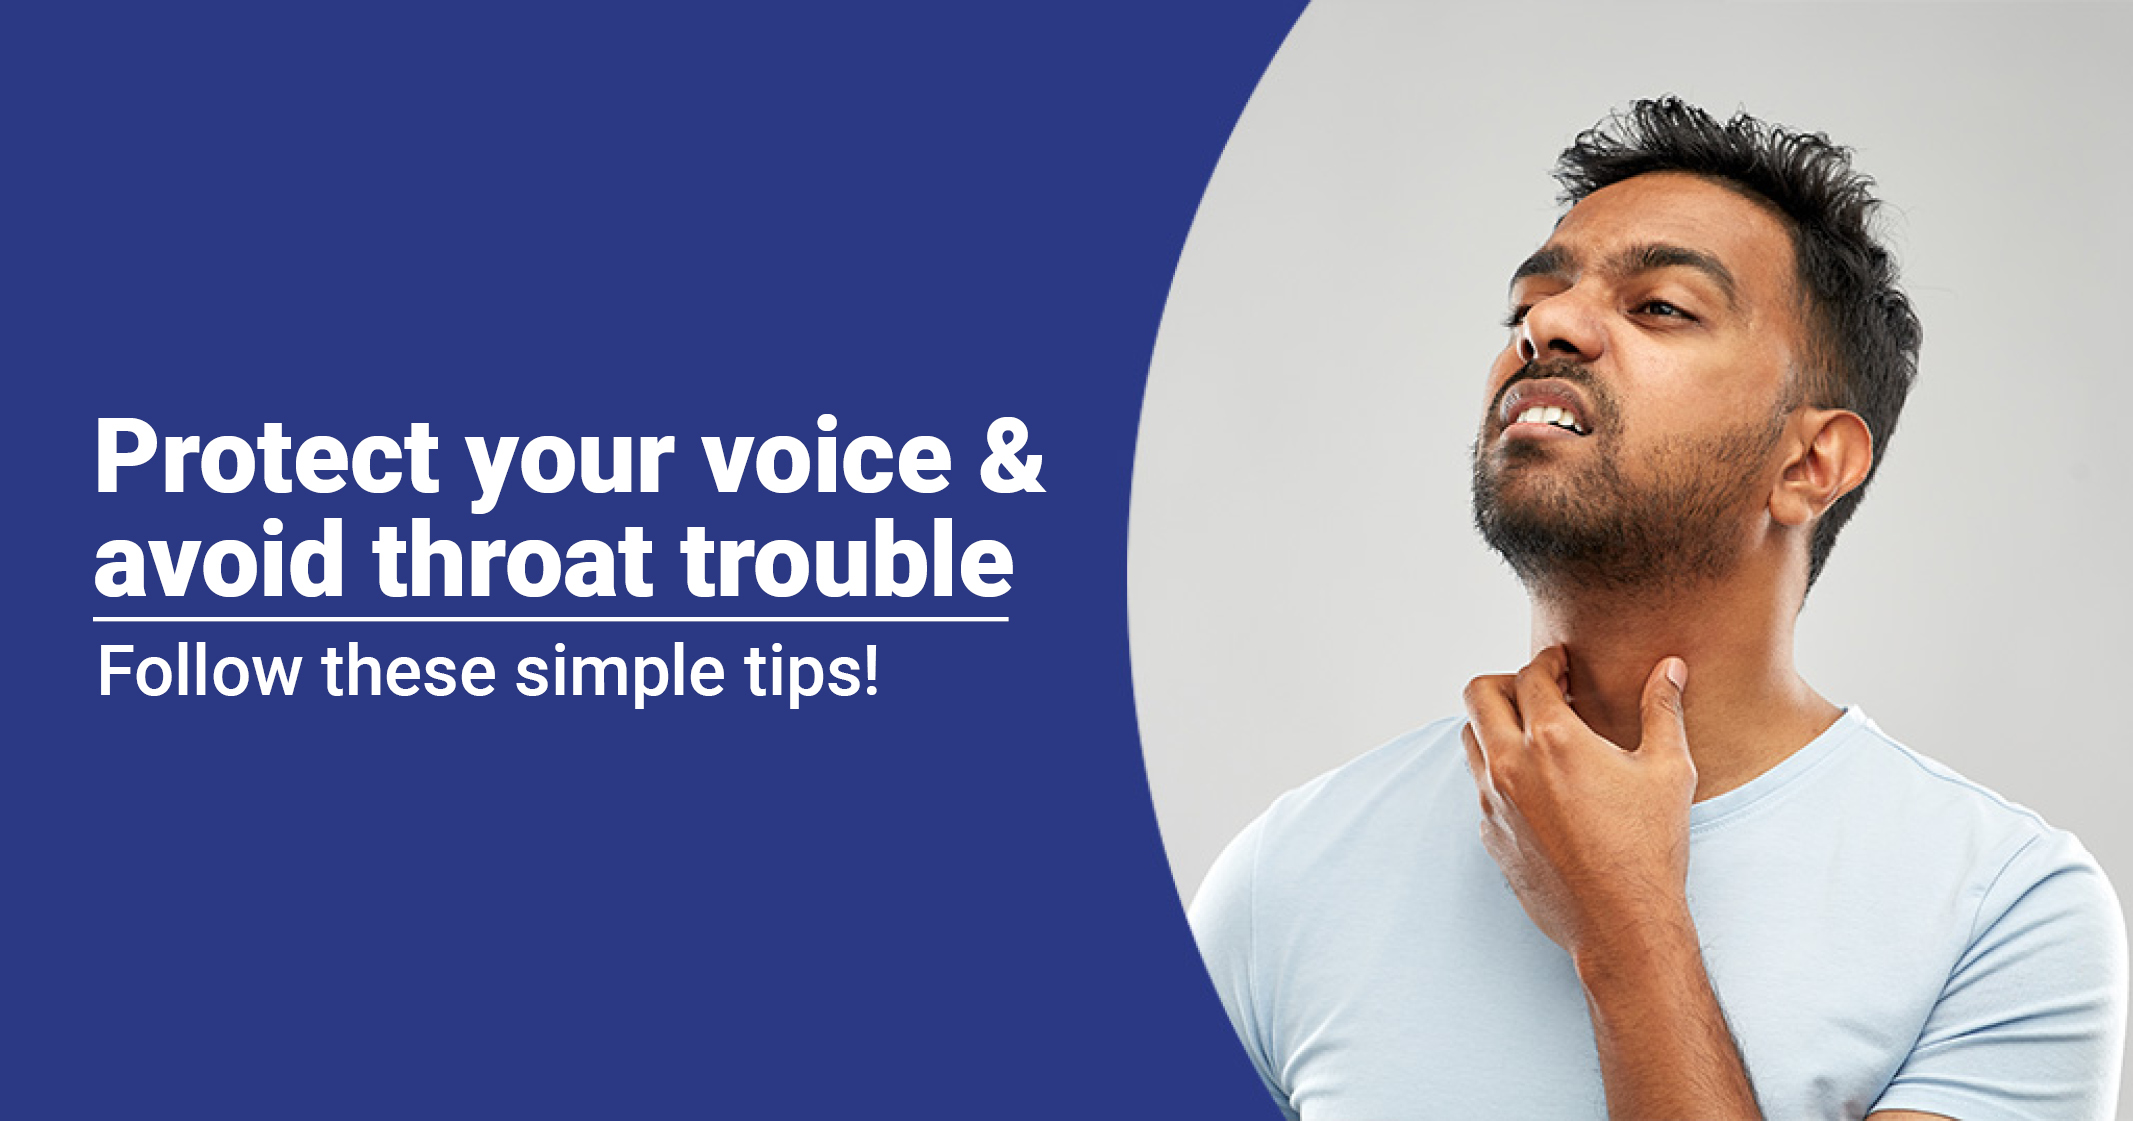 Protecting Your Voice and Avoiding Throat Trouble